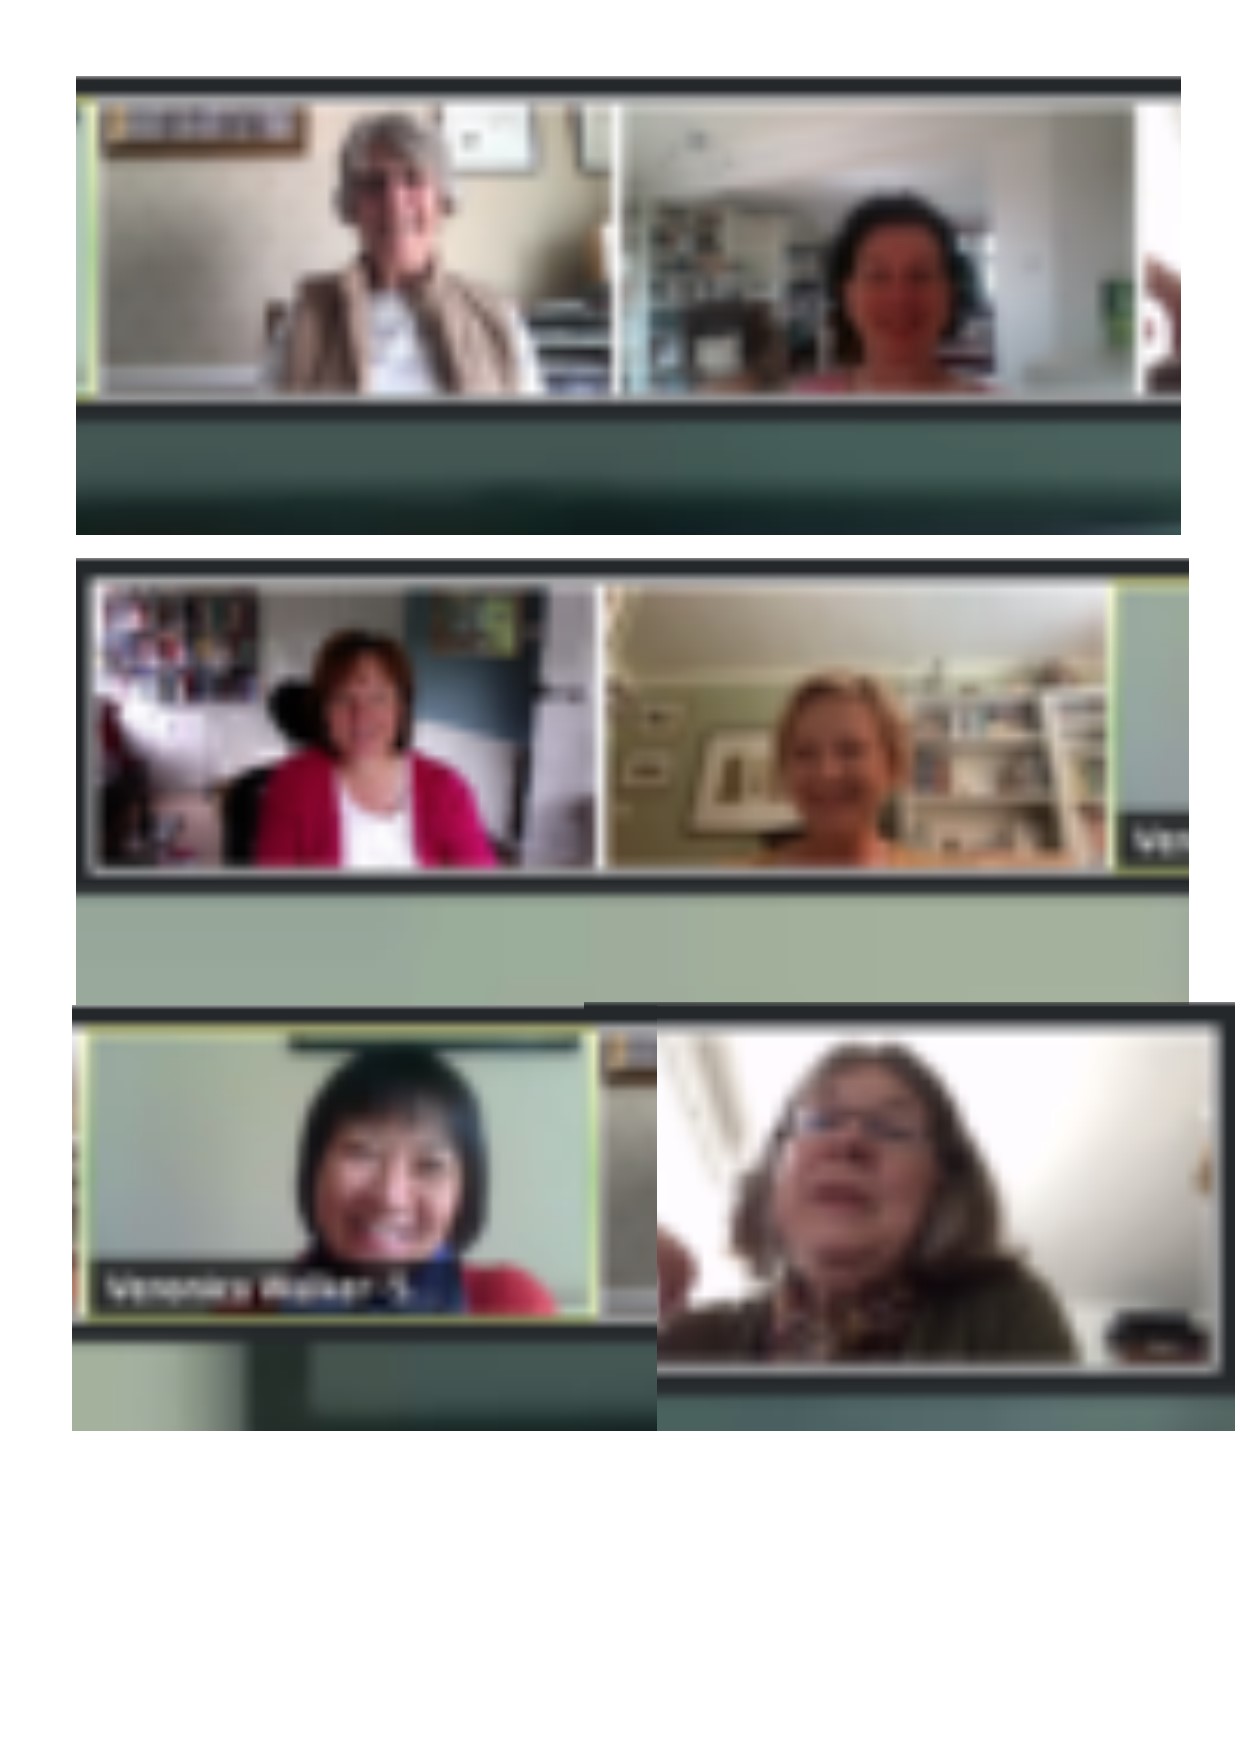 Team meetings continued via Zoom during the 2020 and 2021 coronavirus lockdowns. Members also gave Zoom talks to Knole volunteers, sourced by our research and archived interviews.